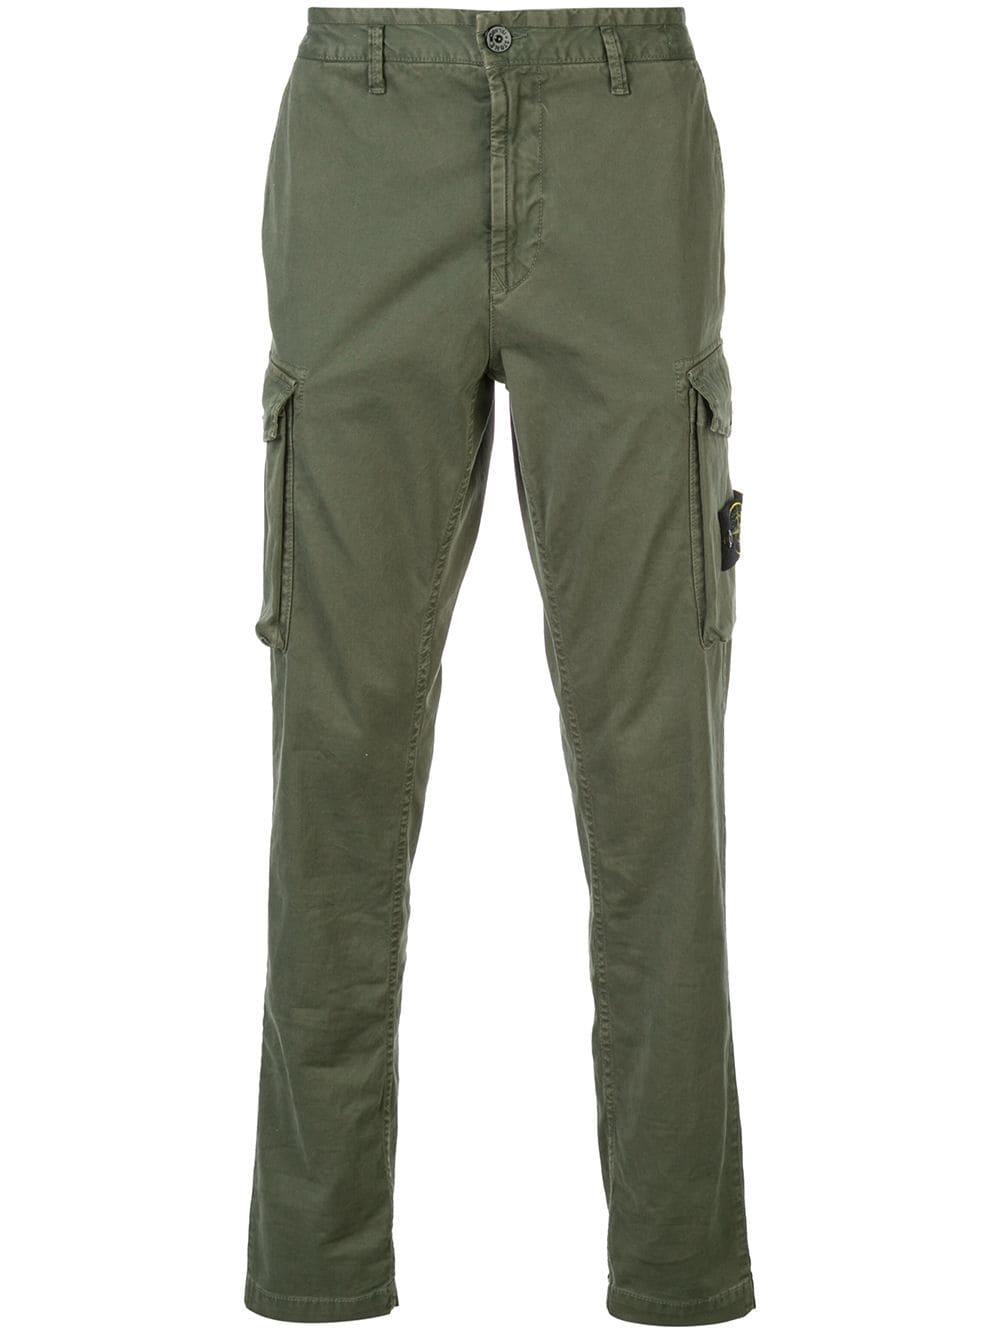 Stone Island Cotton Cargo Trousers in Green for Men - Lyst